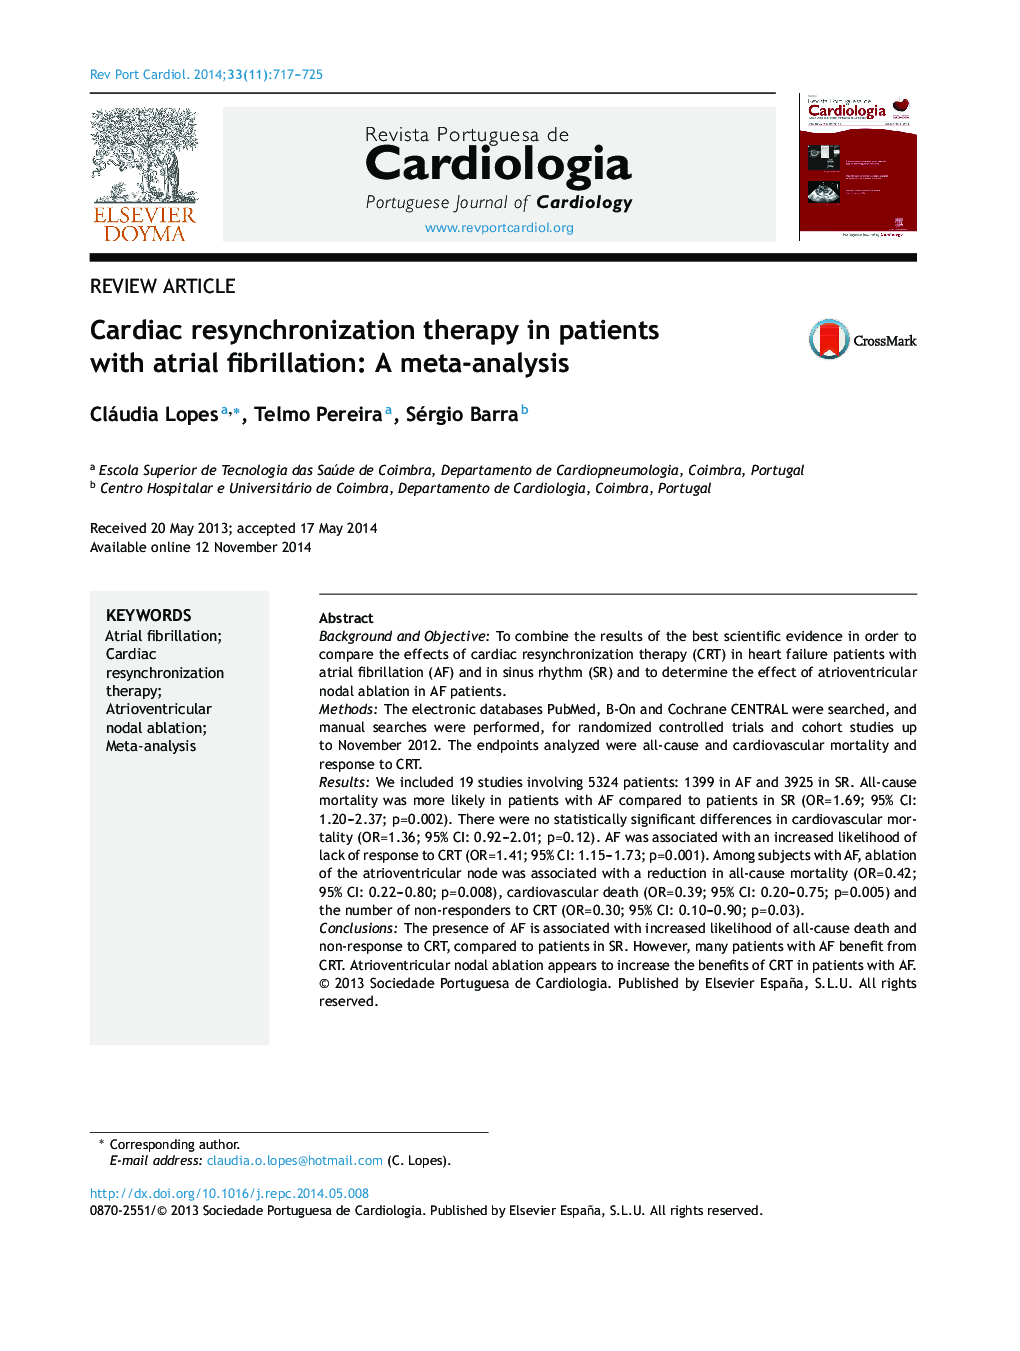 Cardiac resynchronization therapy in patients with atrial fibrillation: A meta-analysis